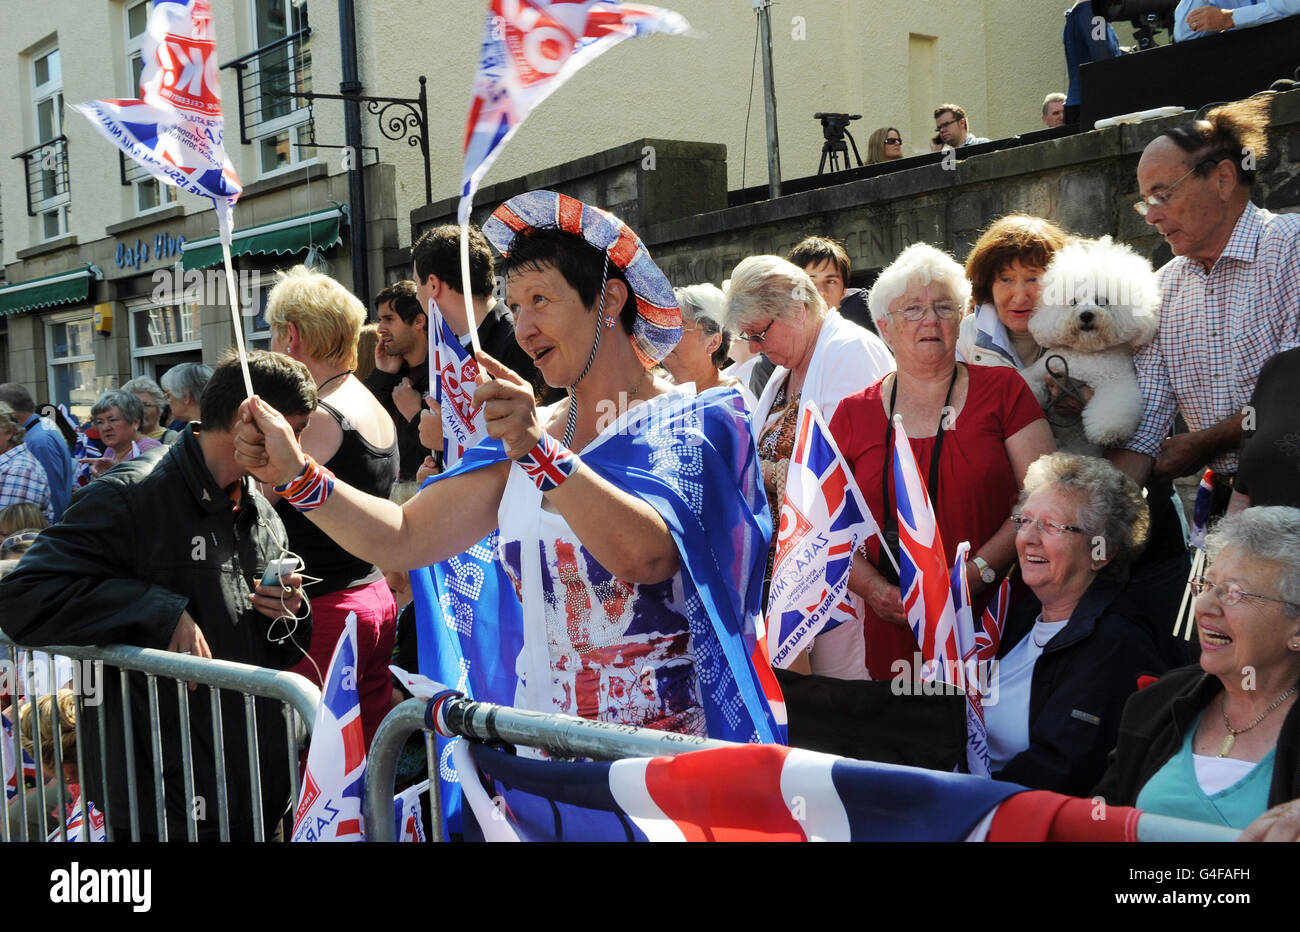 Royal fan Elaine Russell from Glasgow joins crowds at the Canongate Kirk, in Edinburgh, as final preparations continue ahead of the wedding of Zara Phillips and Mike Tindall. Stock Photo